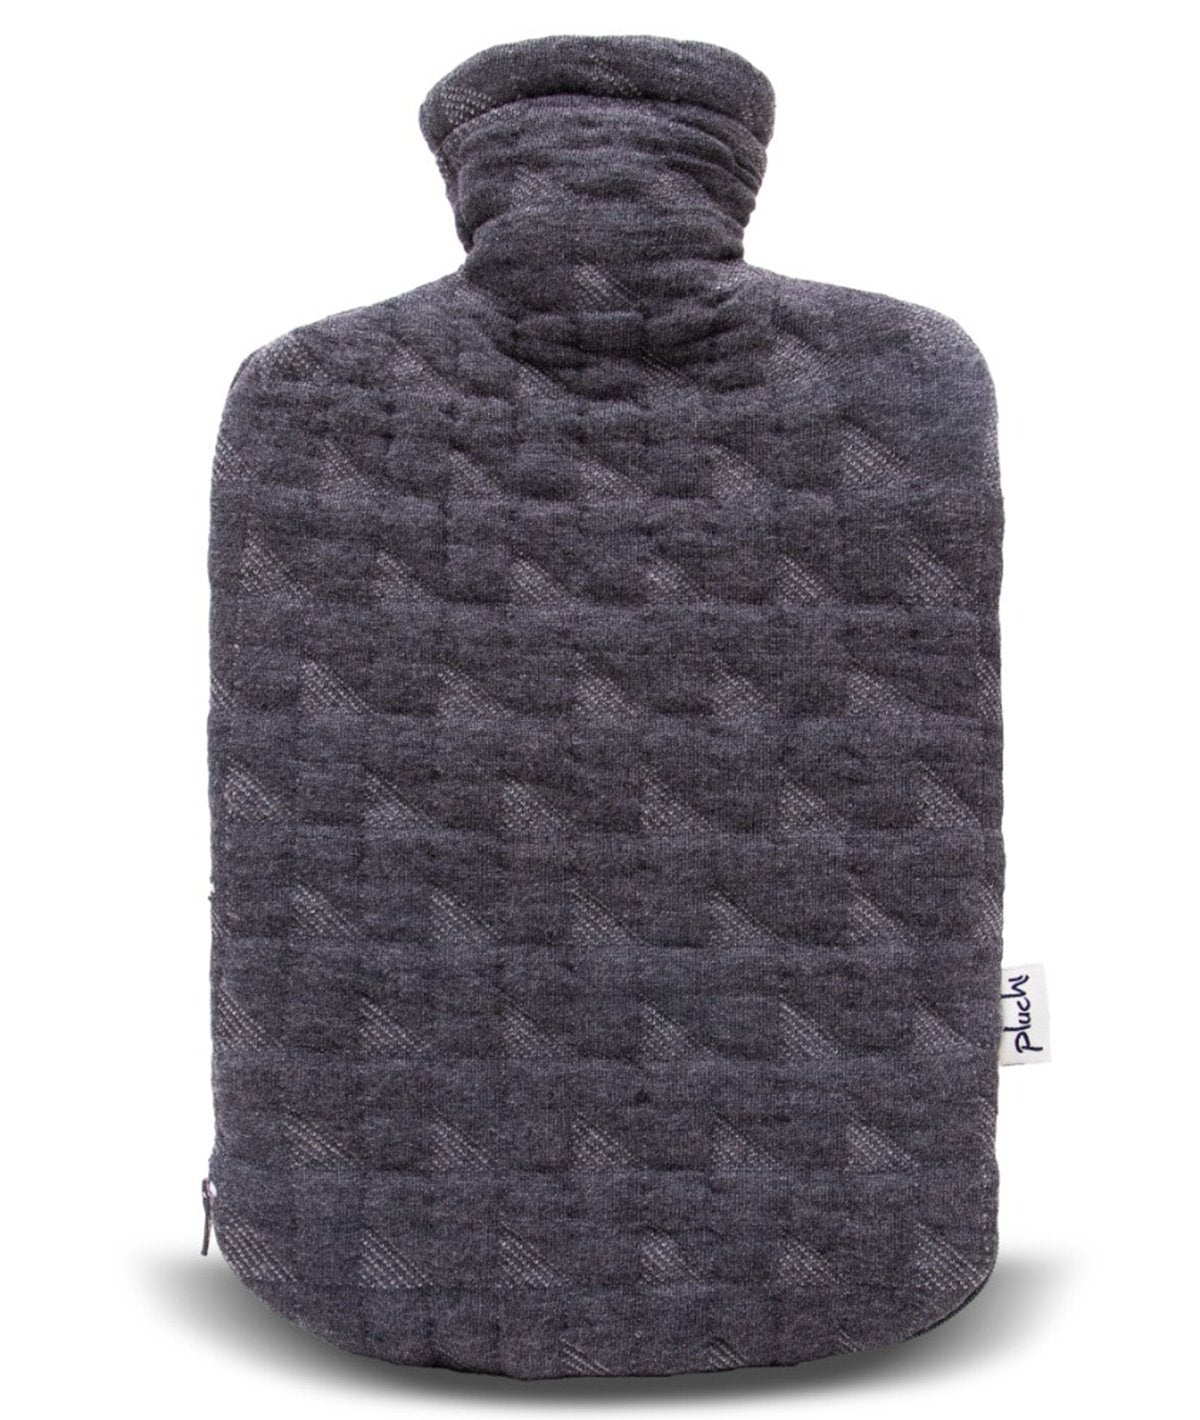 Alp Quilted Non - Dark Grey Combed Cotton Hot Water Bottle Cover